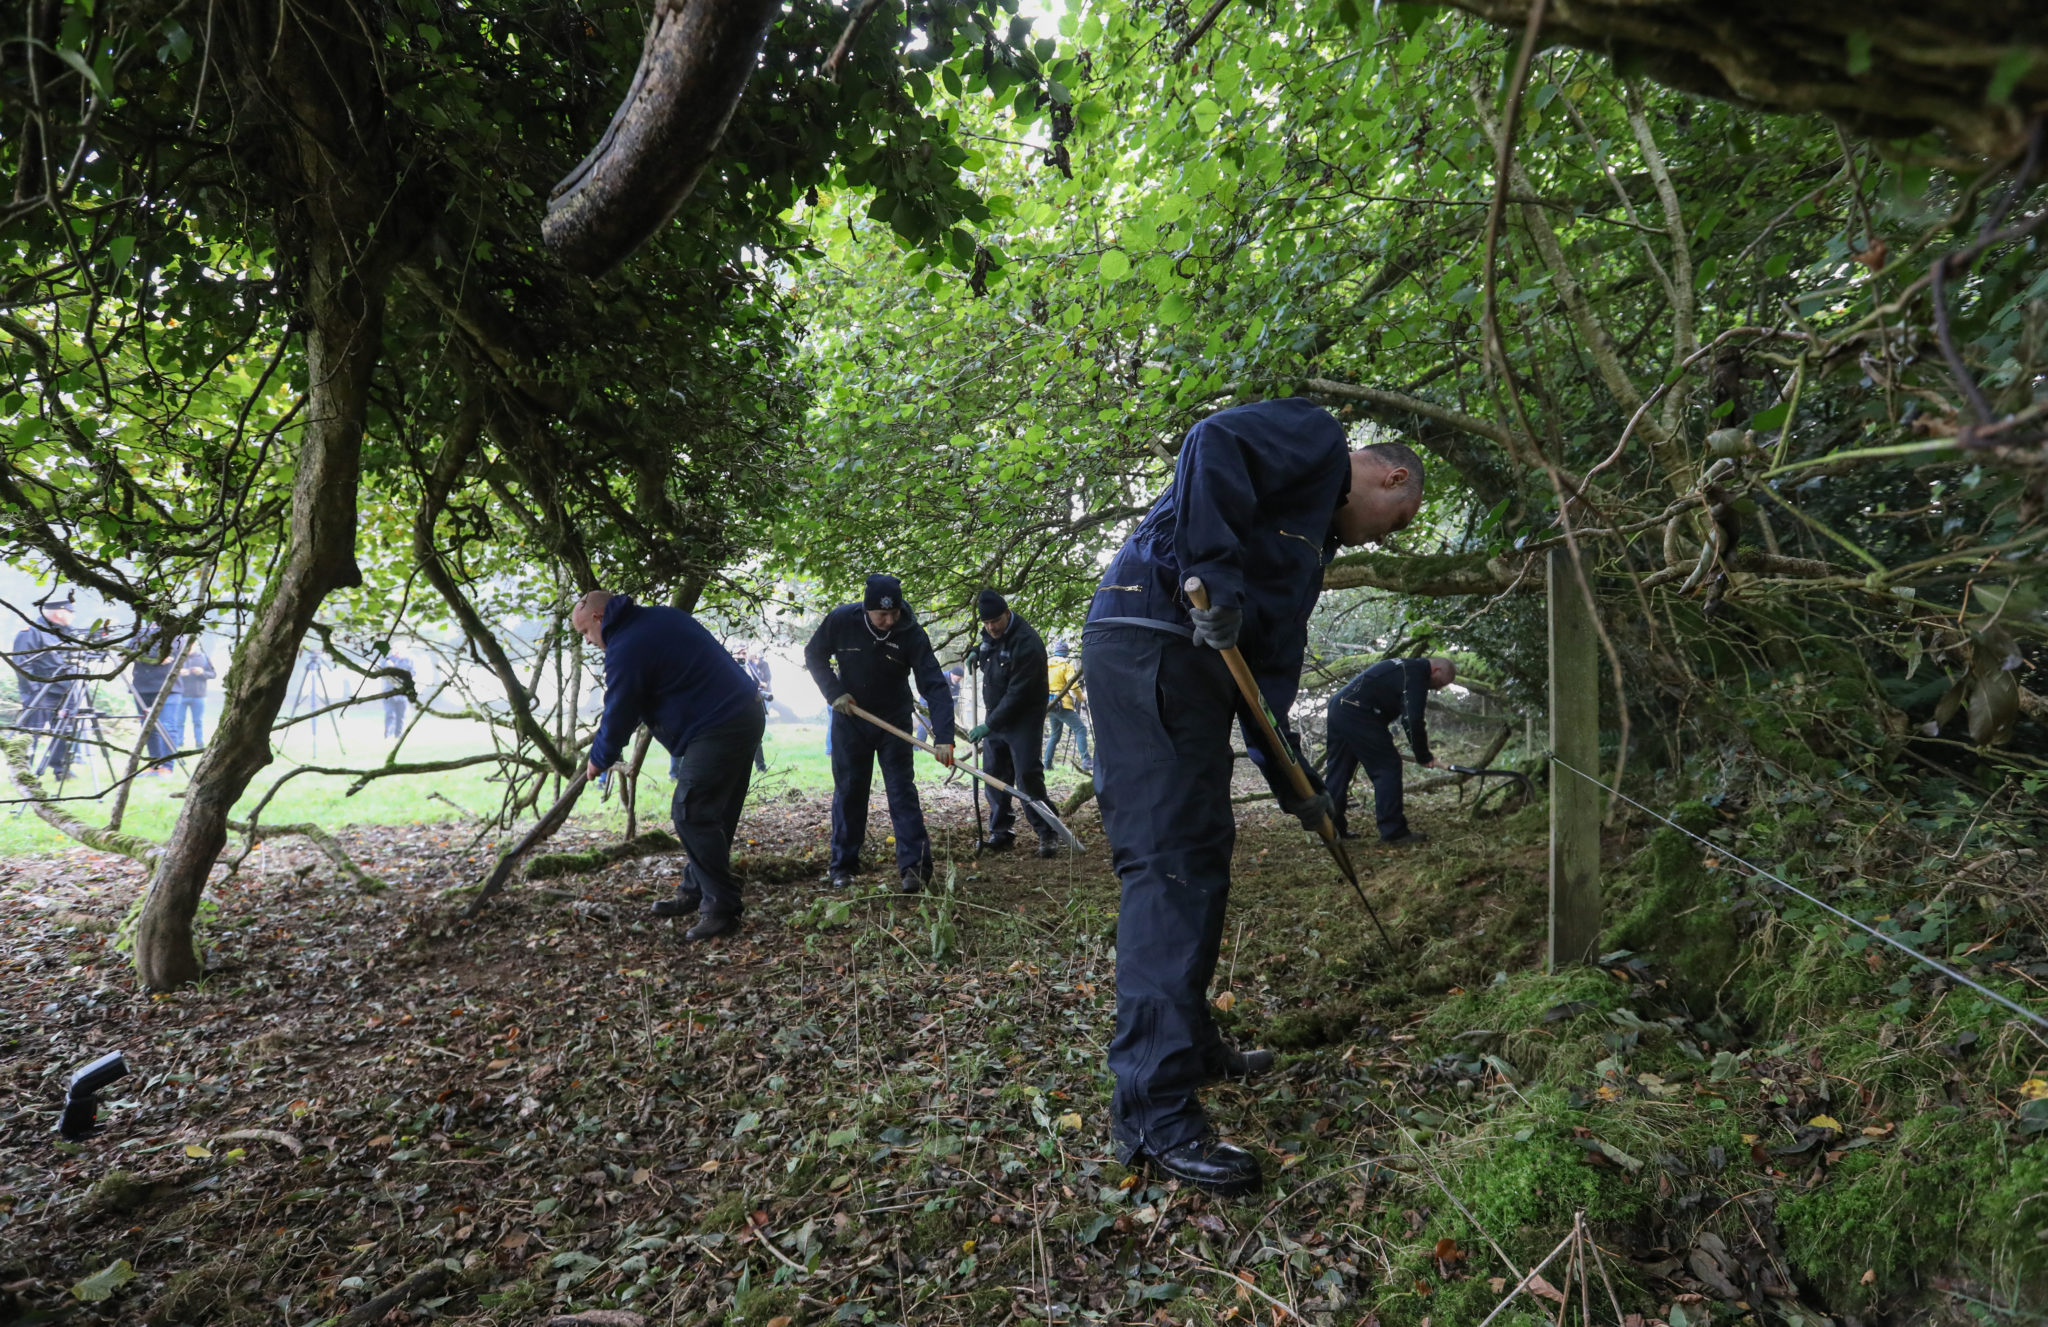 Gardaí searching a wooded area near Usk Little in Co Kildare, in relation to investigations into the disappearance of women in the Leinster area including Deirdre Jacob and JoJo Dullard